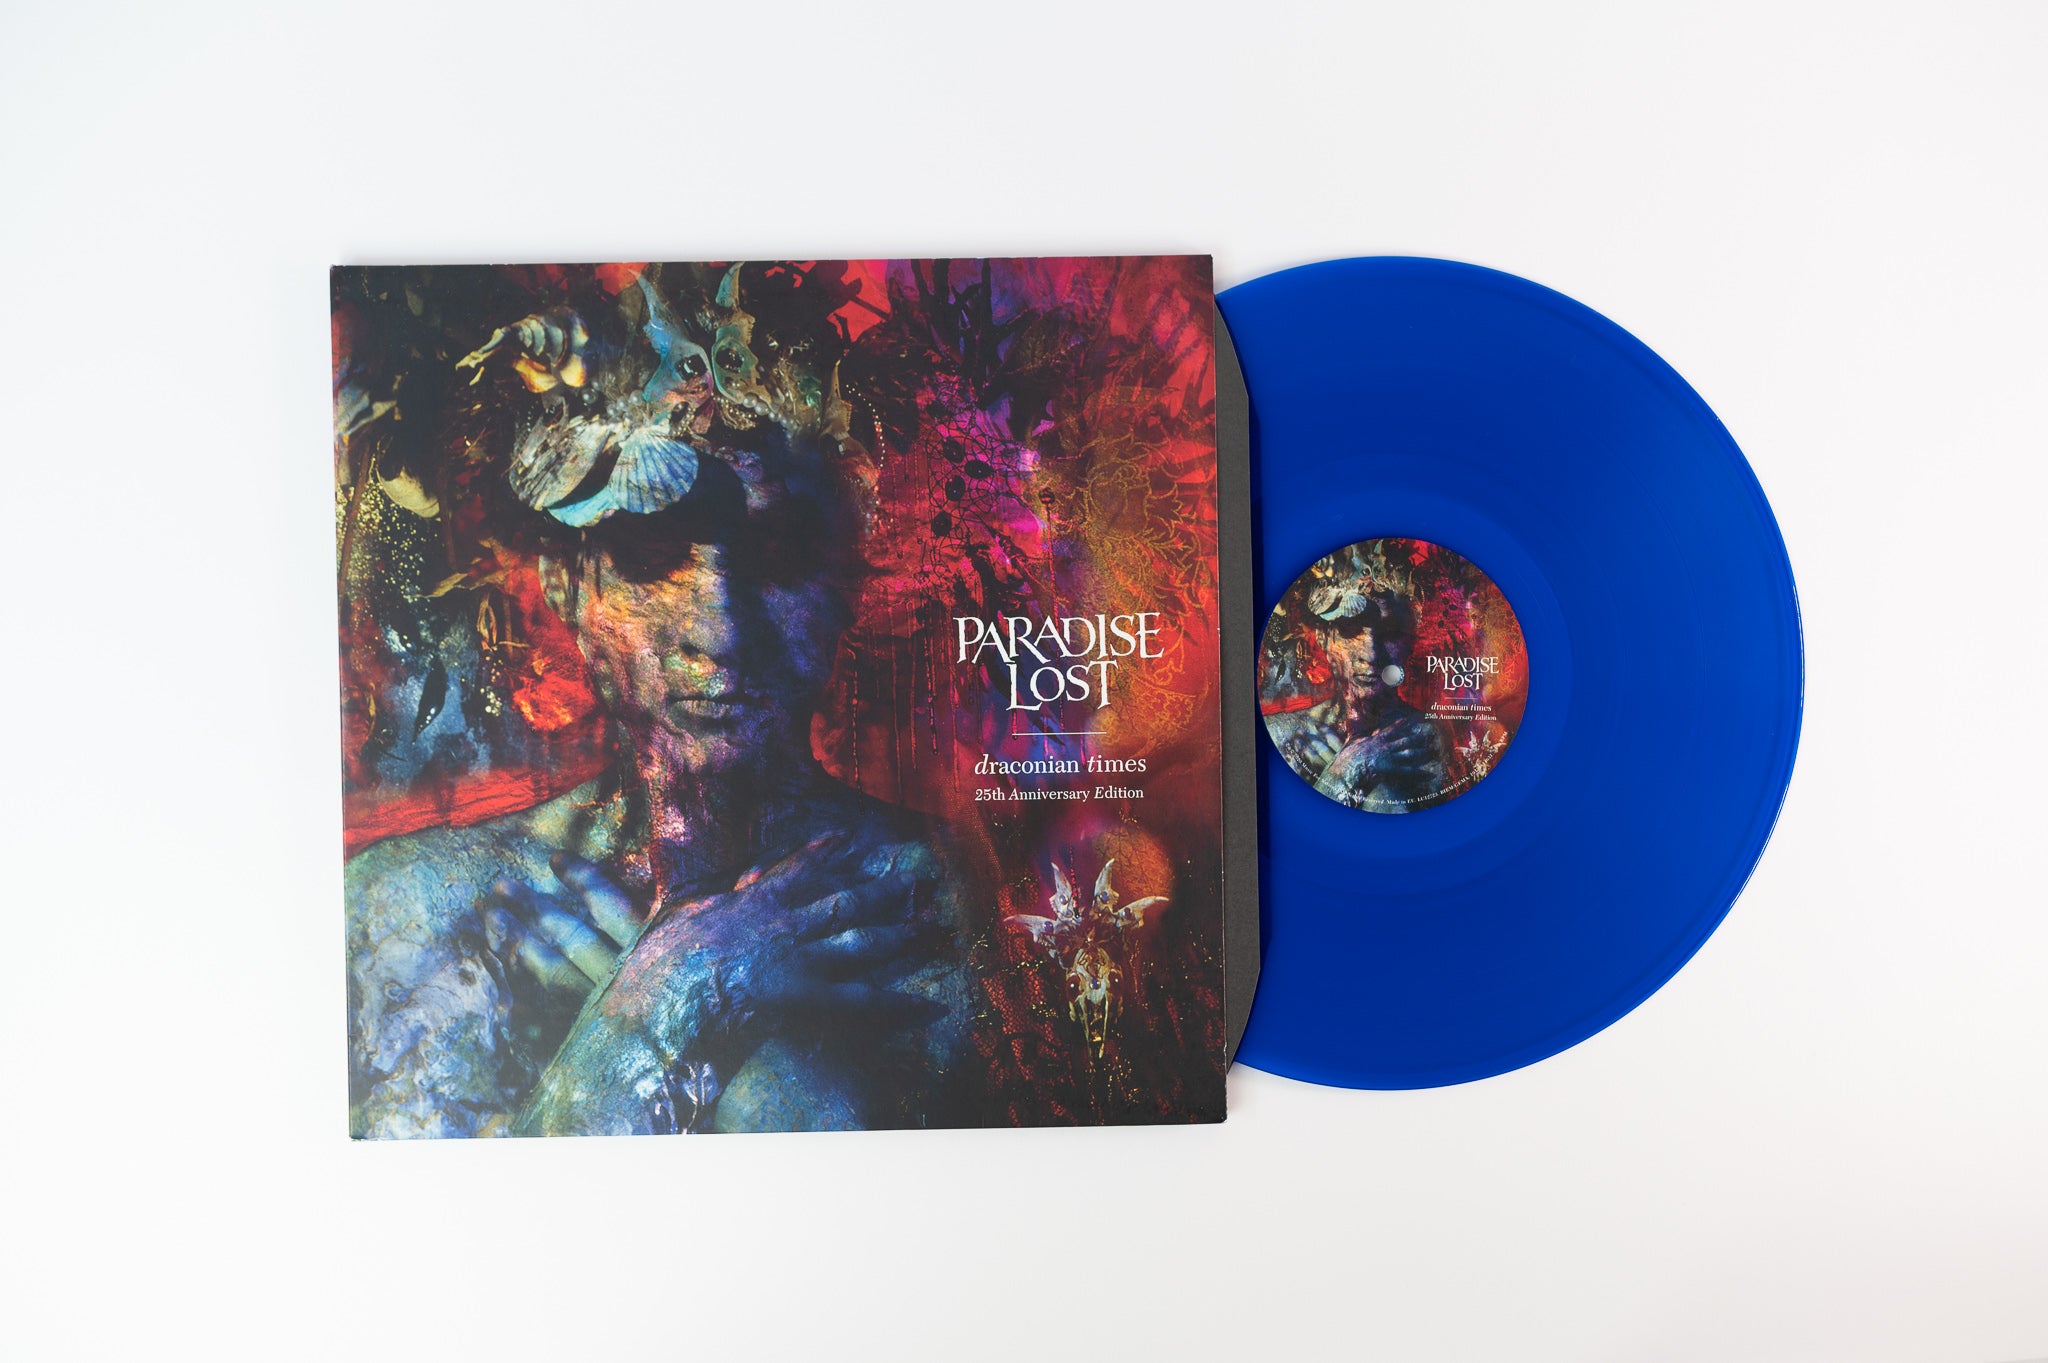 Paradise Lost - Draconian Times (25th Anniversary Edition) on Music for Nations Blue Translucent Vinyl Reissue